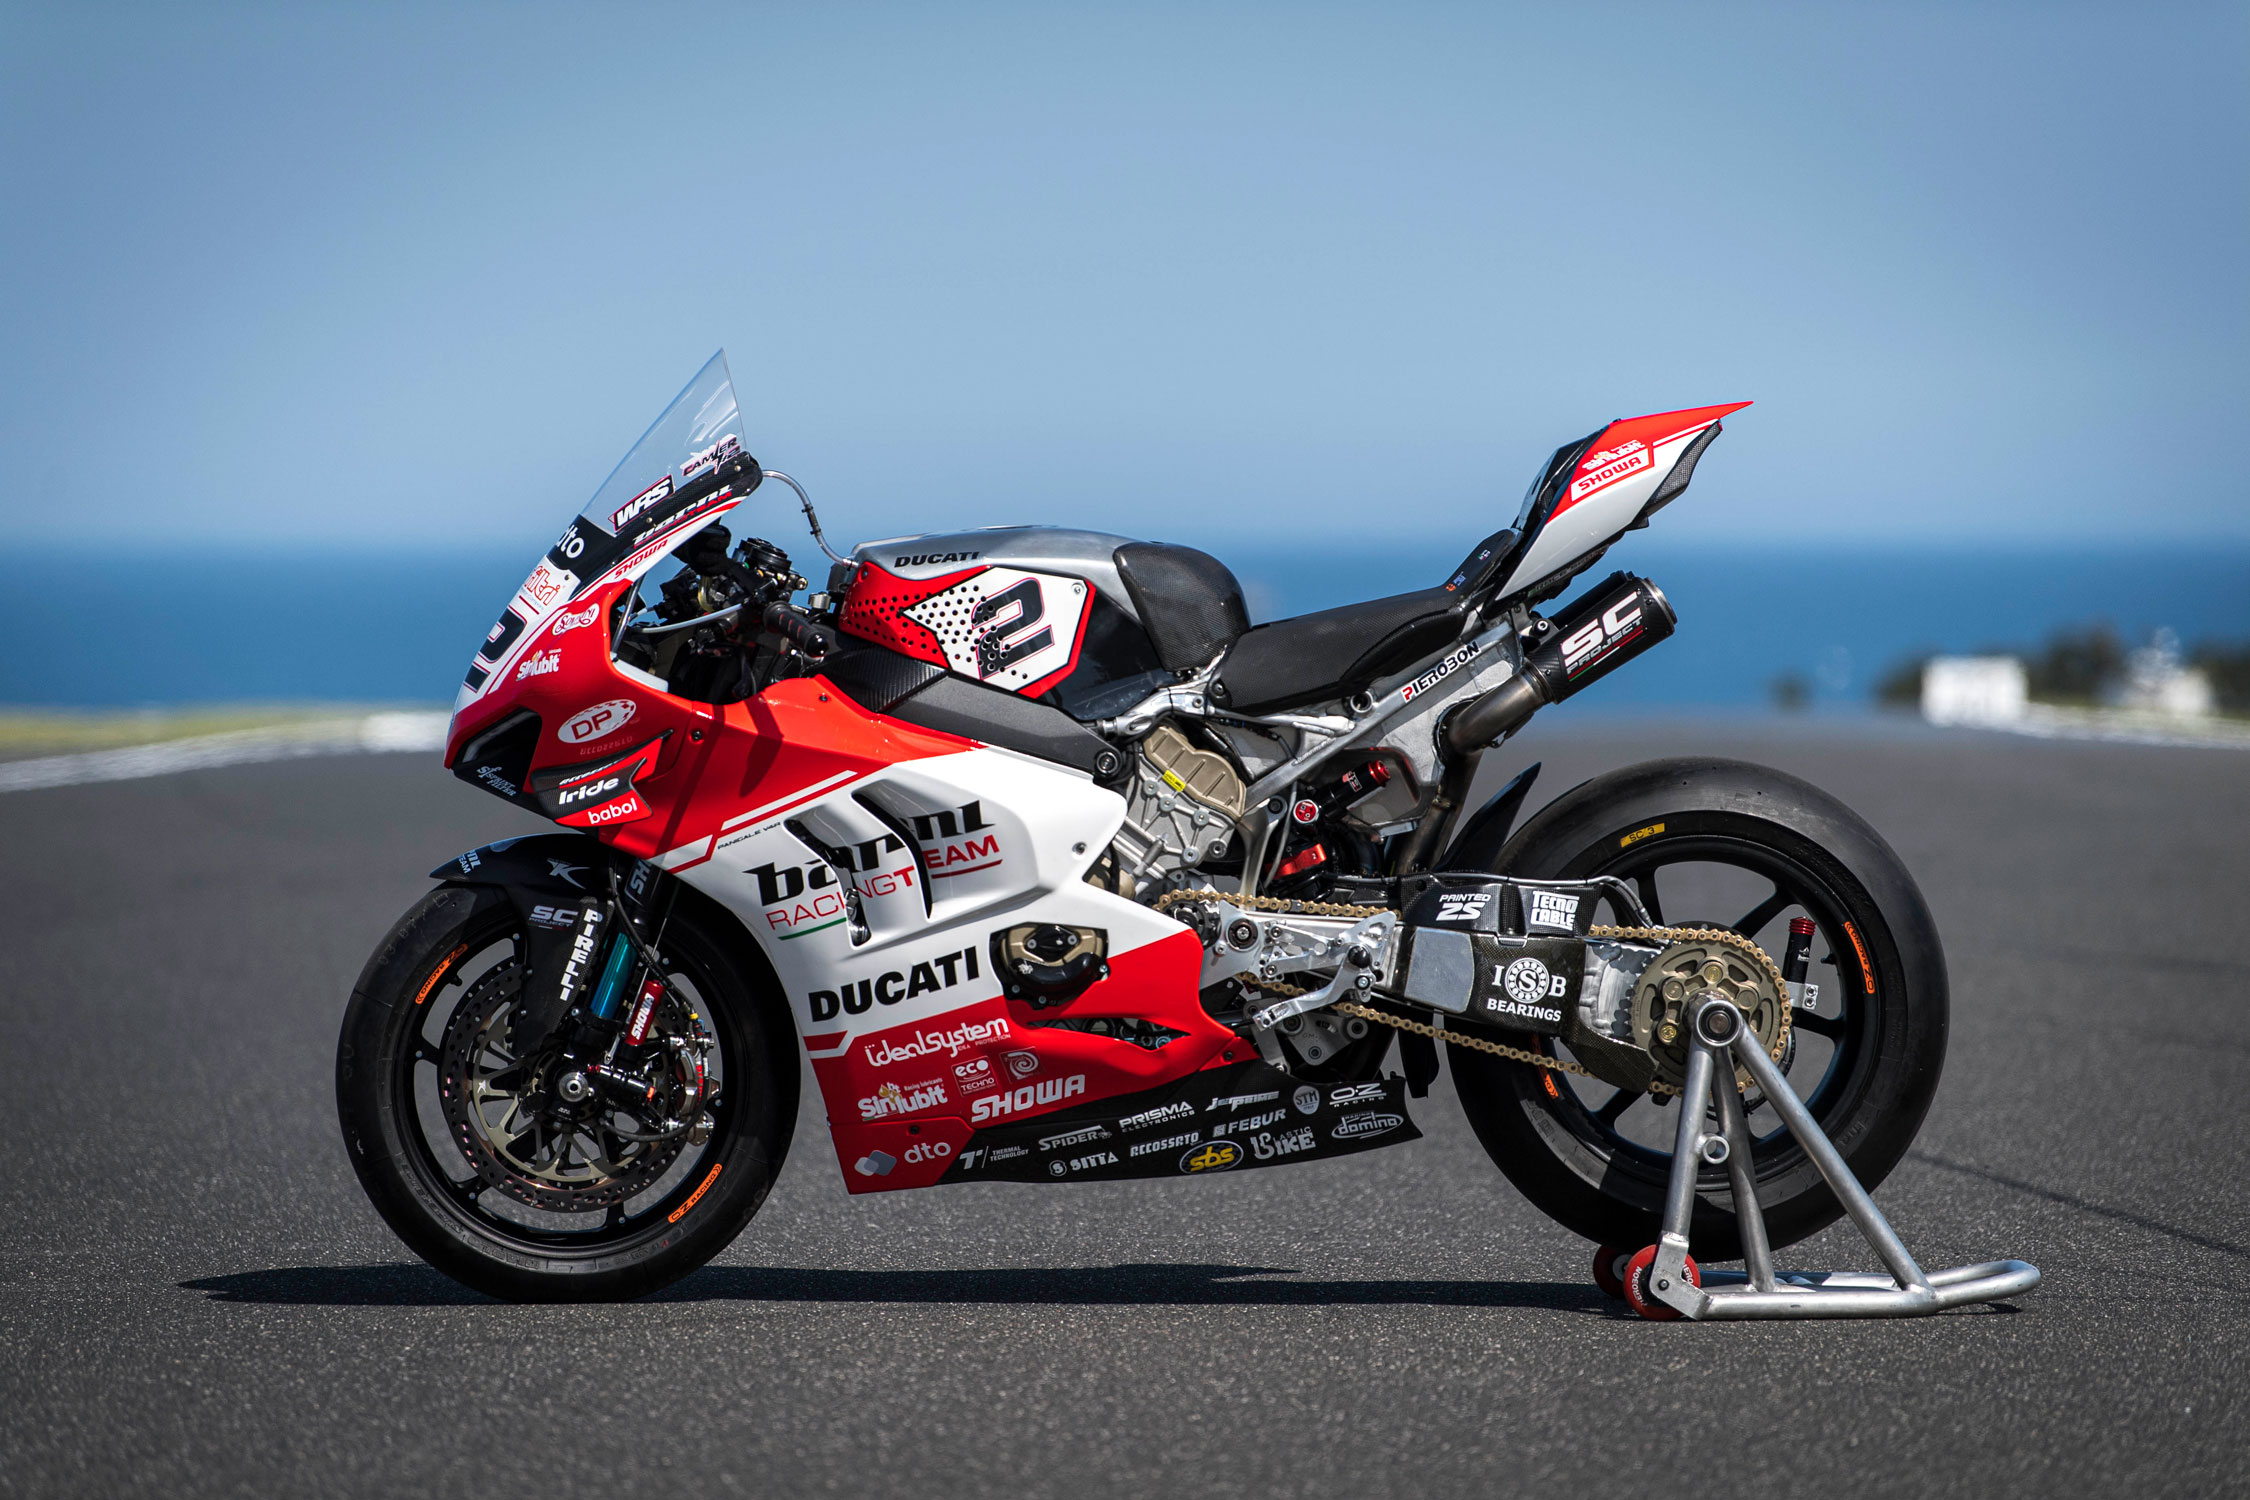 New Full Exhaust System For Ducati Panigale V4